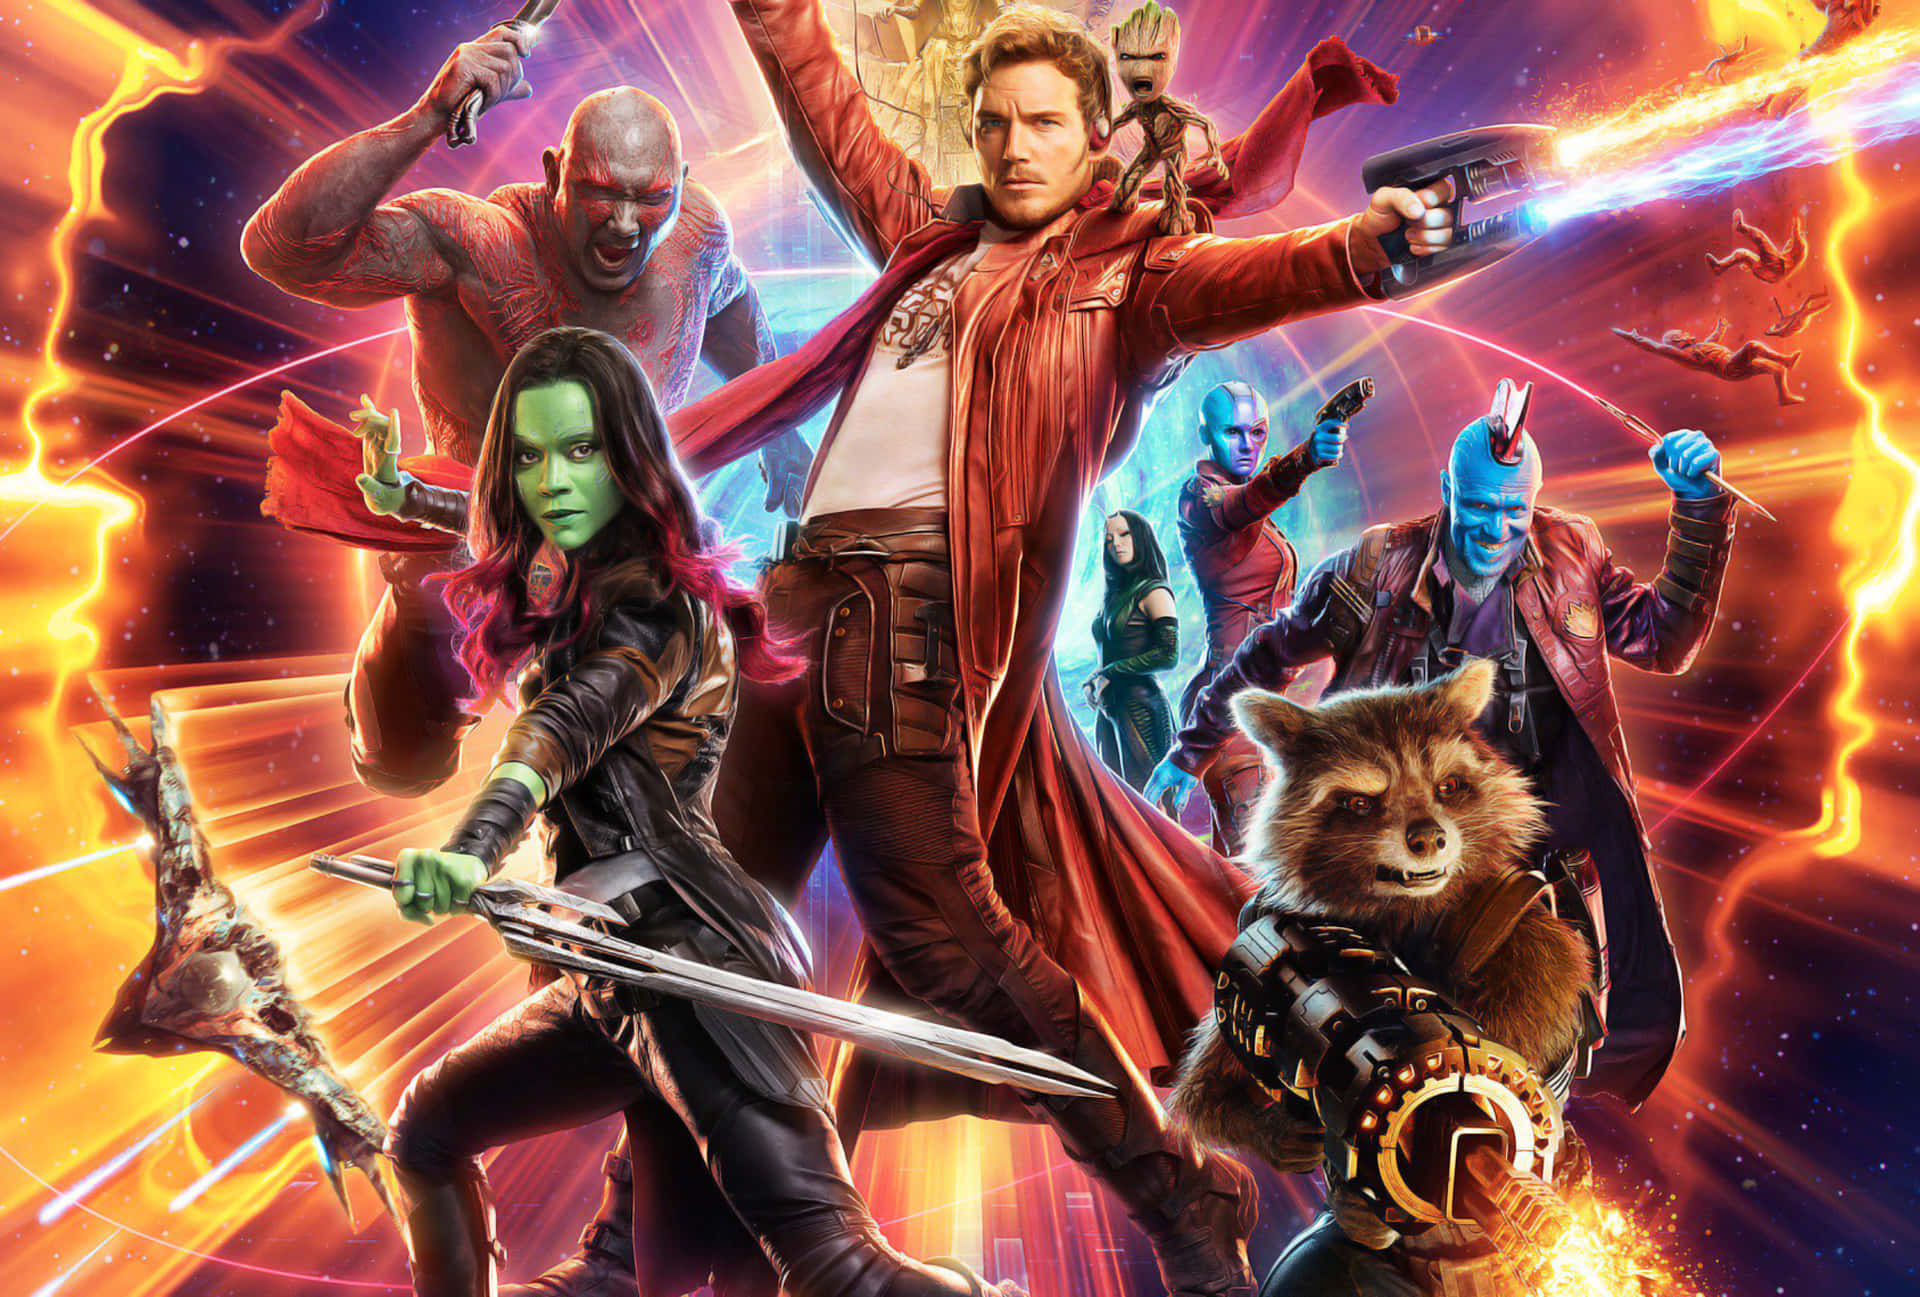 "The Guardians Of The Galaxy Are Back and Ready To Save the Galaxy Again!" Wallpaper